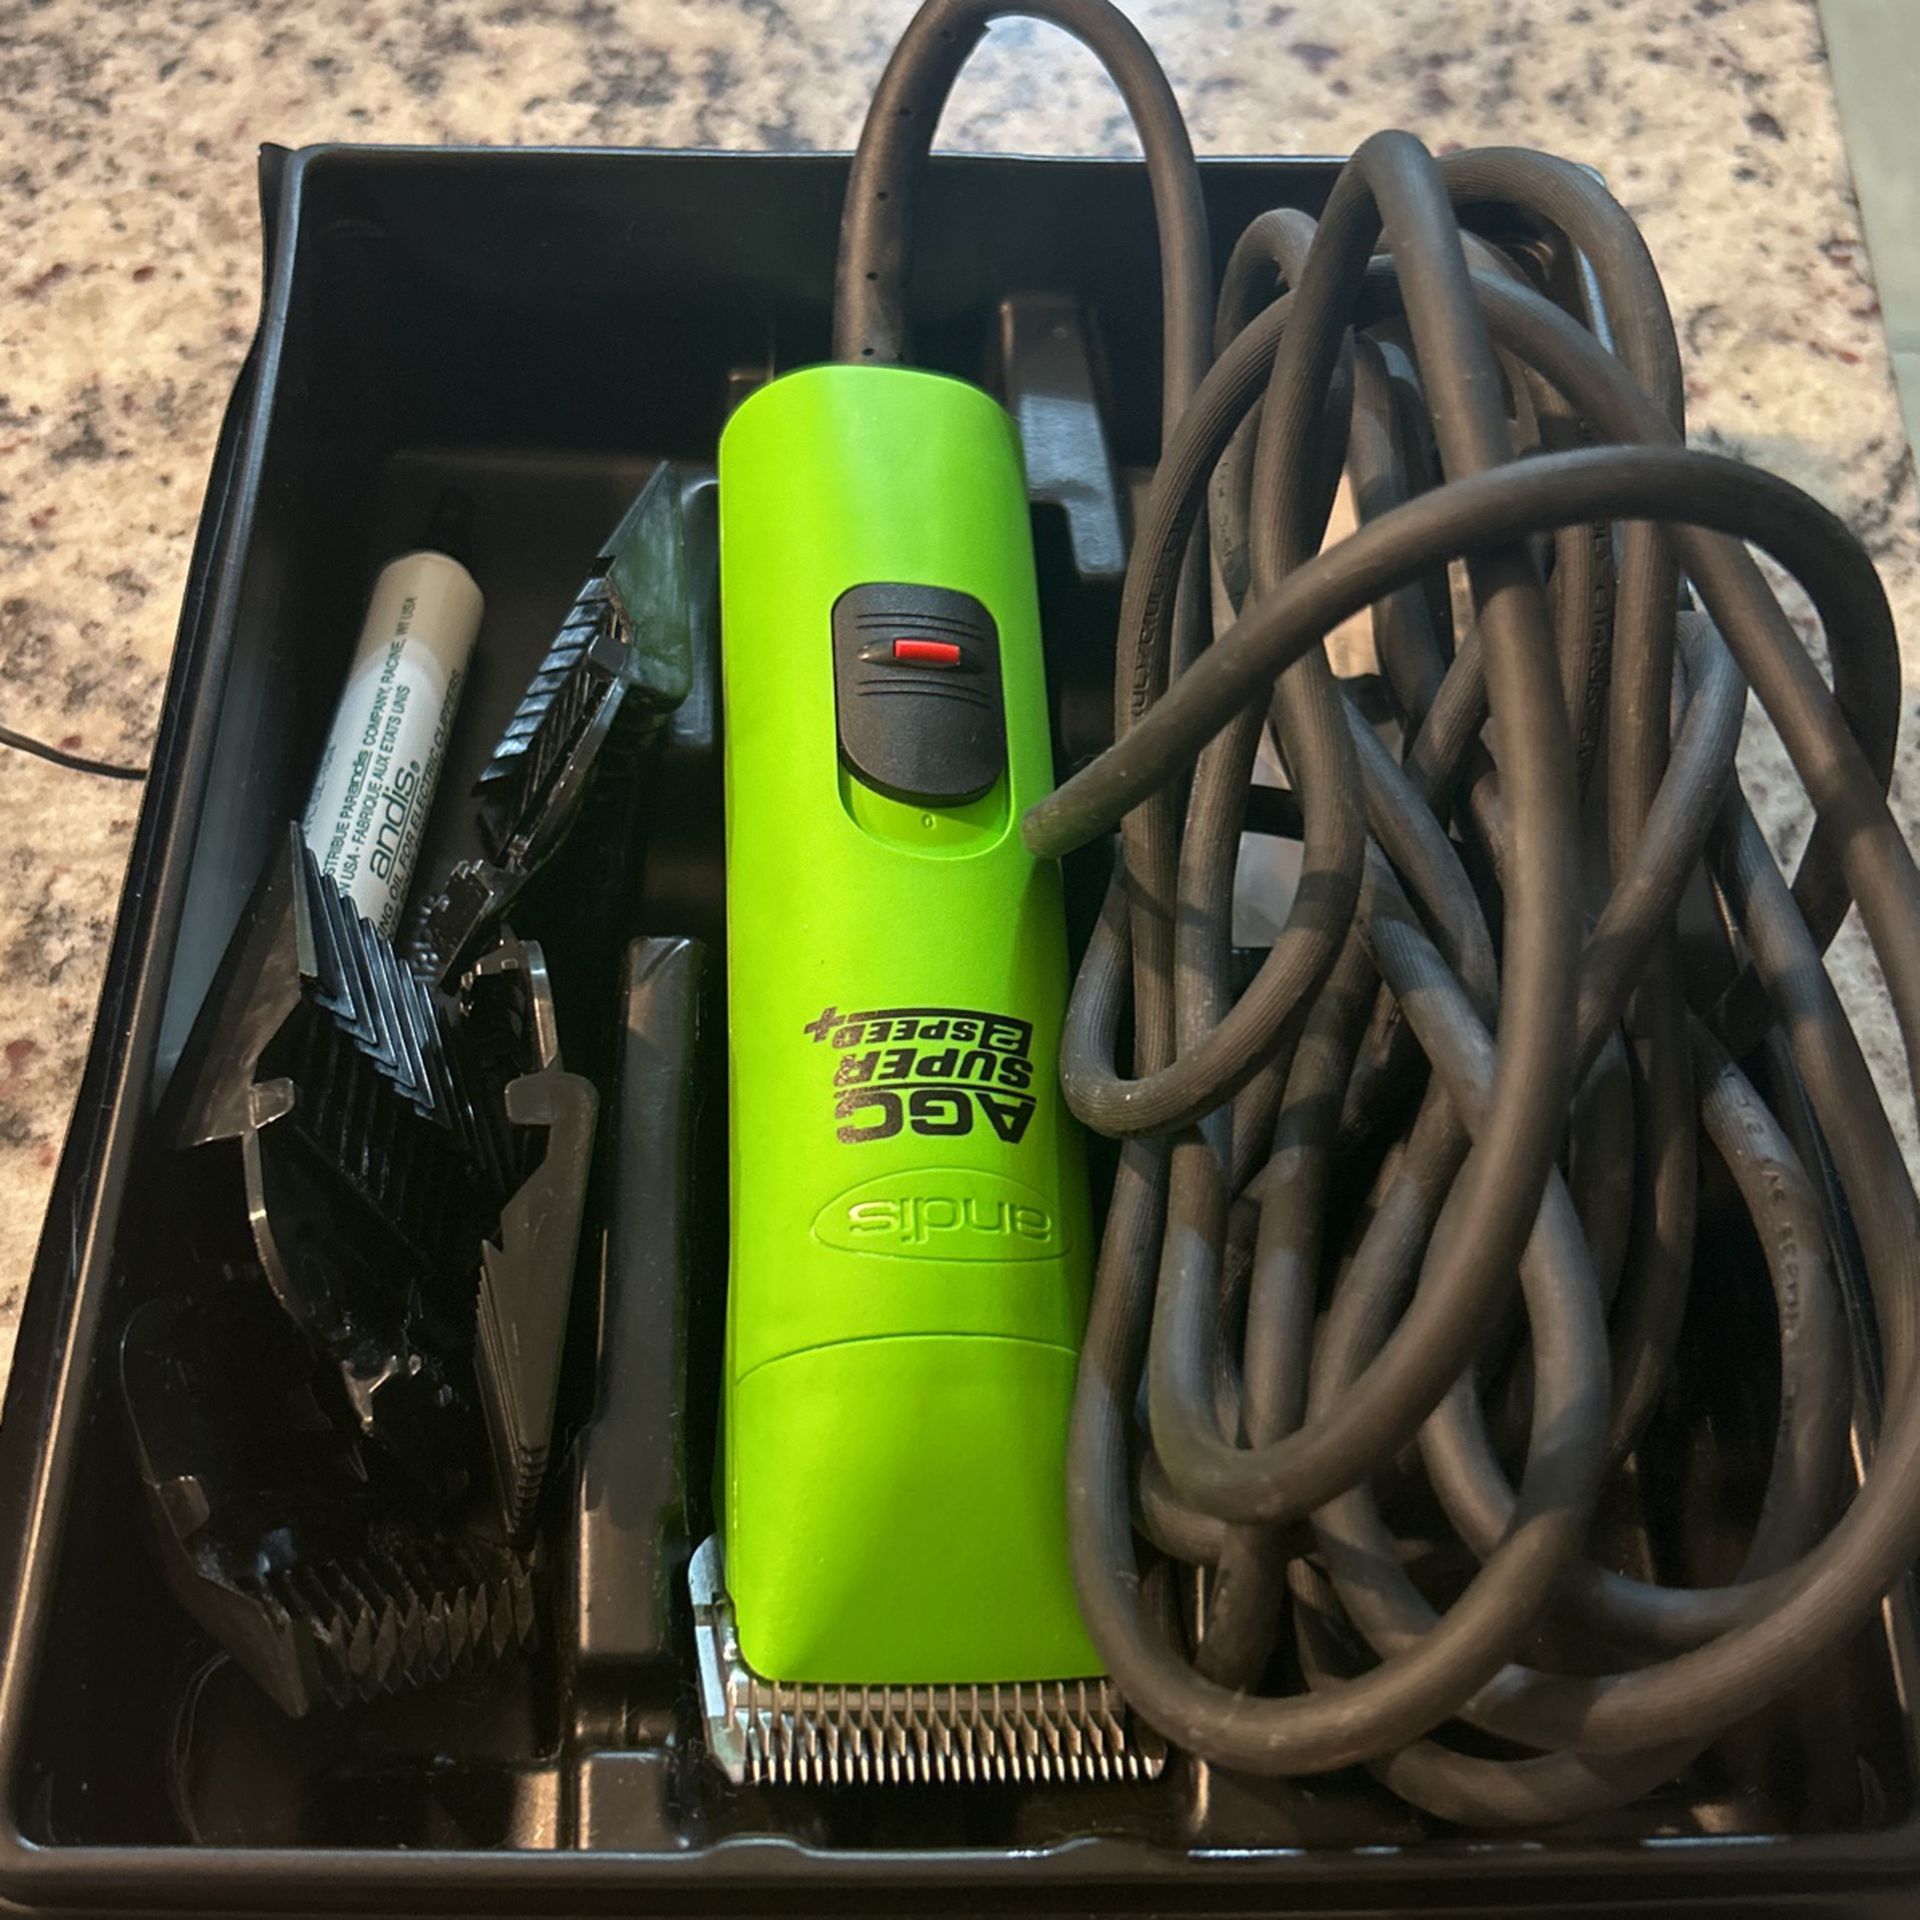 Dog Clippers Andis AGC Super 2speed